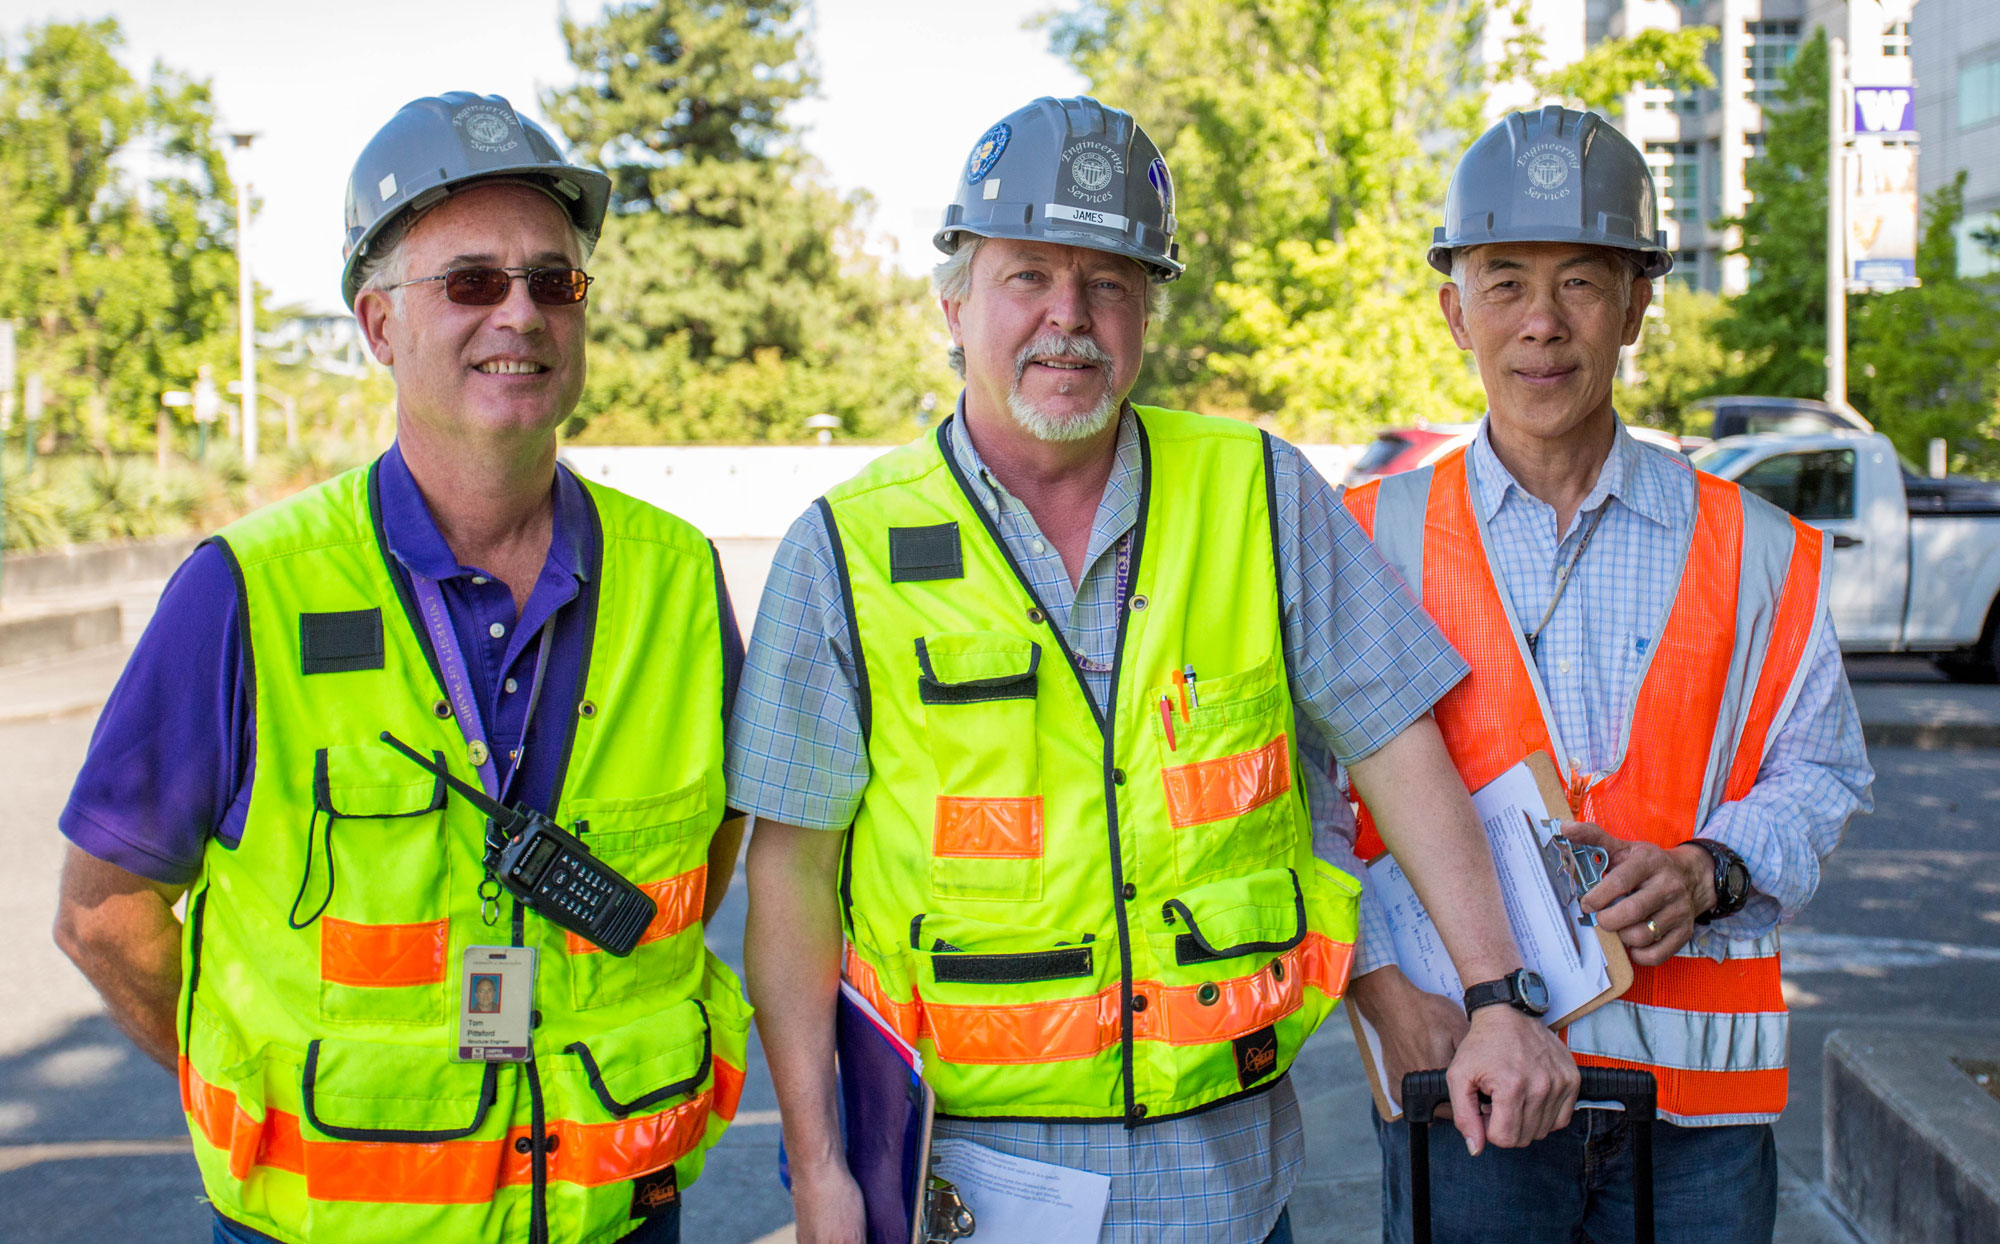 Campus engineers on the ATC-20 team during an earthquake preparedness drill